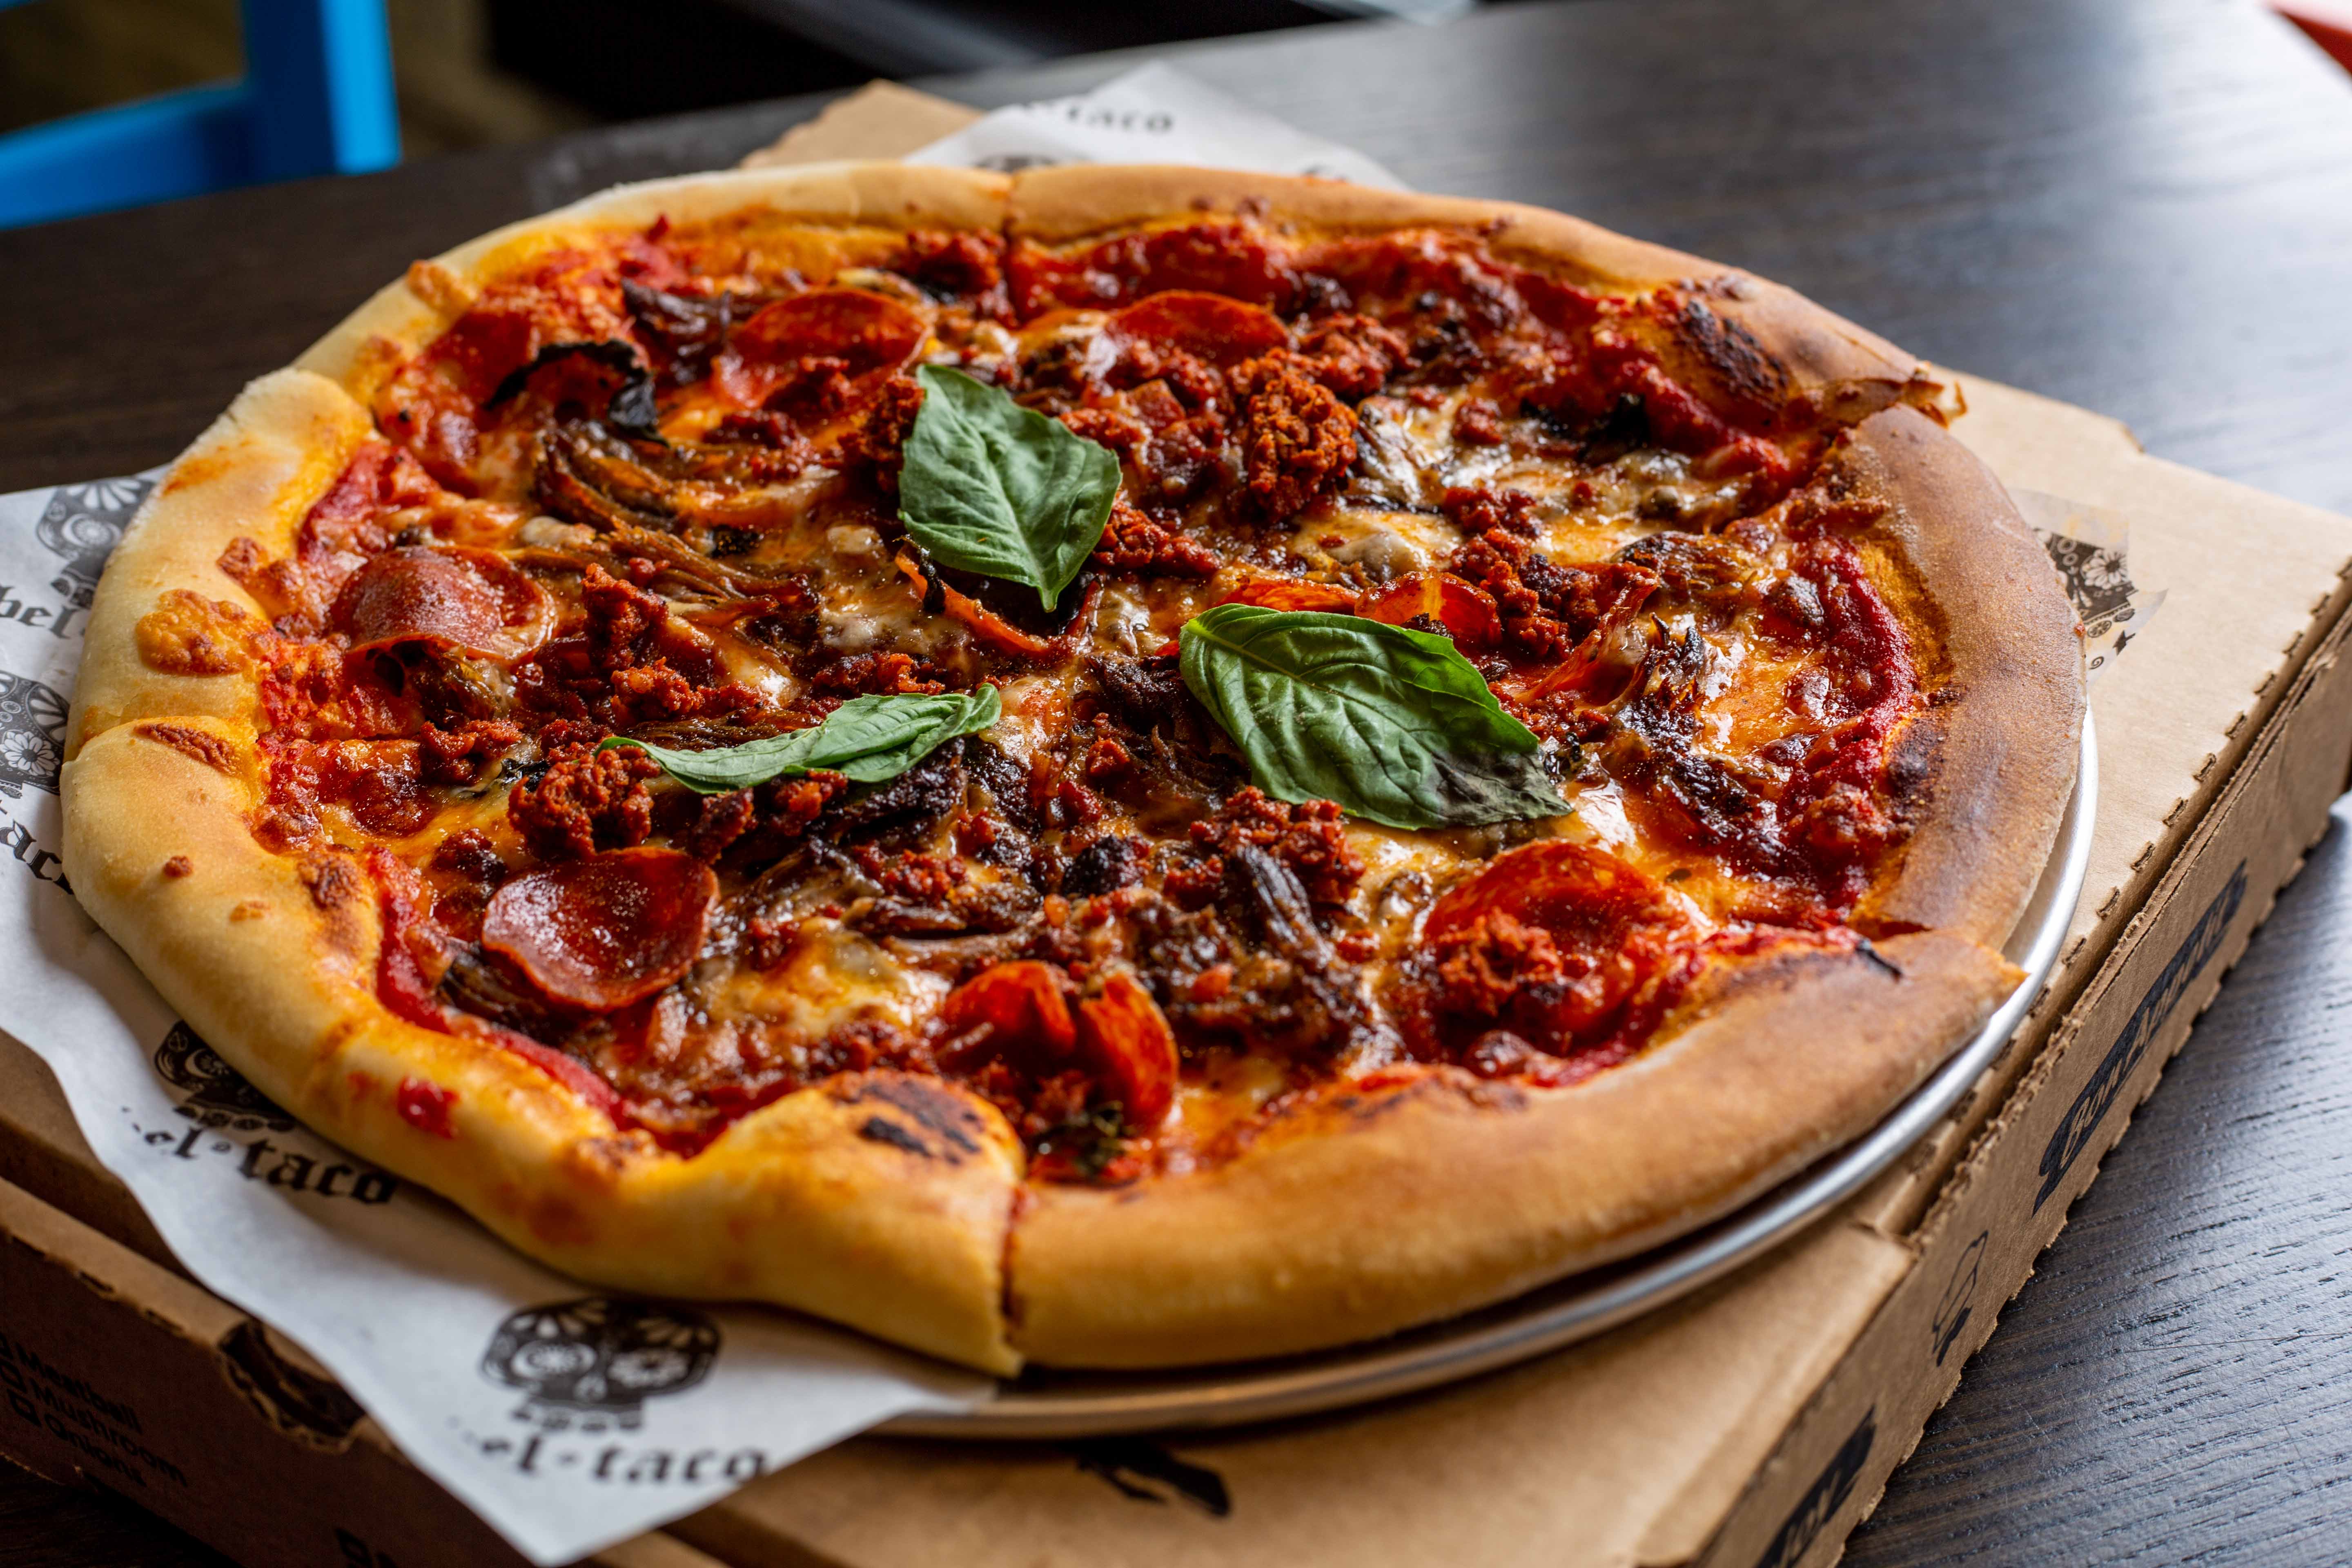 The “Meat Affair” pie at Rebel Margherita is a meaty compilation of barbacoa, Mexican chorizo, and pepperoni.